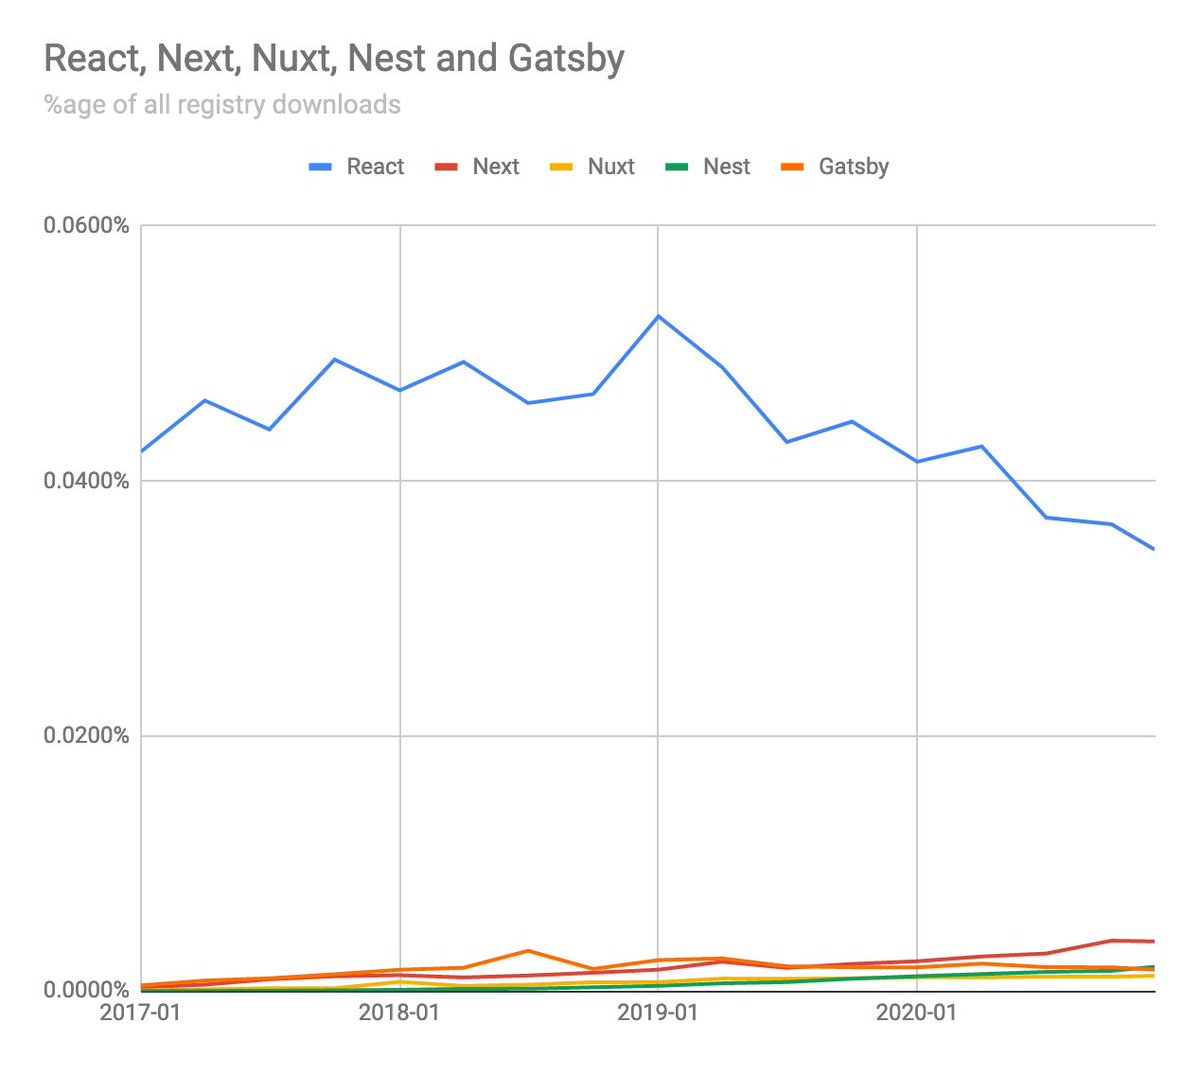 While we're pondering, let's check out what I think of as the "new class" frameworks: the N**t trio and Gatsby. Relative to React they are barely there: